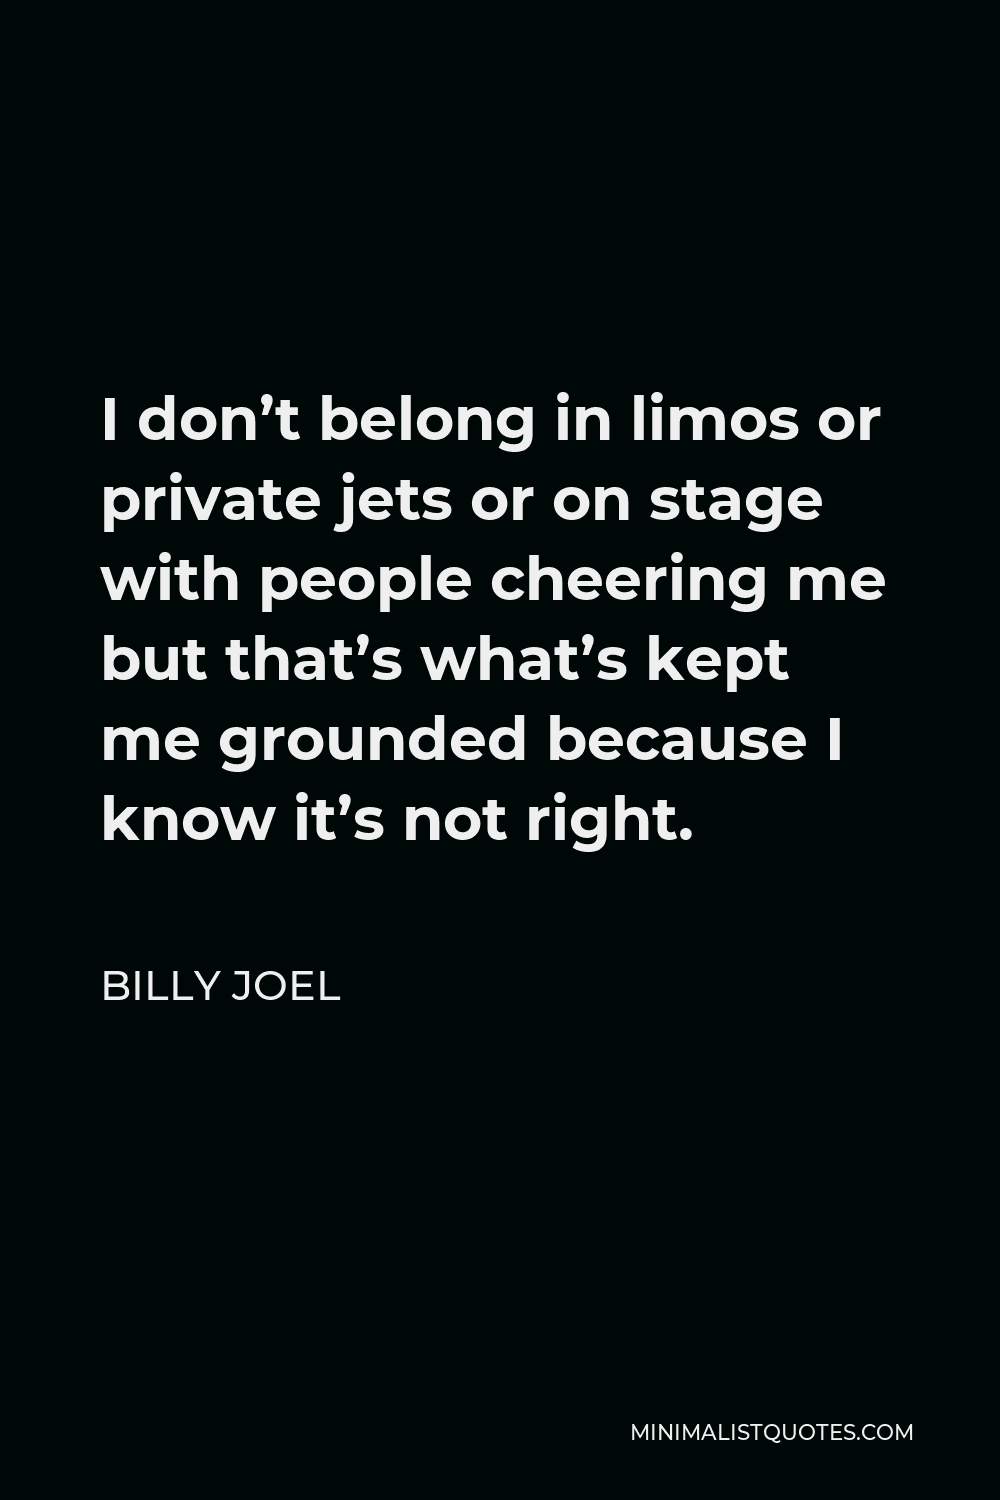 Billy Joel Quote - I don’t belong in limos or private jets or on stage with people cheering me but that’s what’s kept me grounded because I know it’s not right.